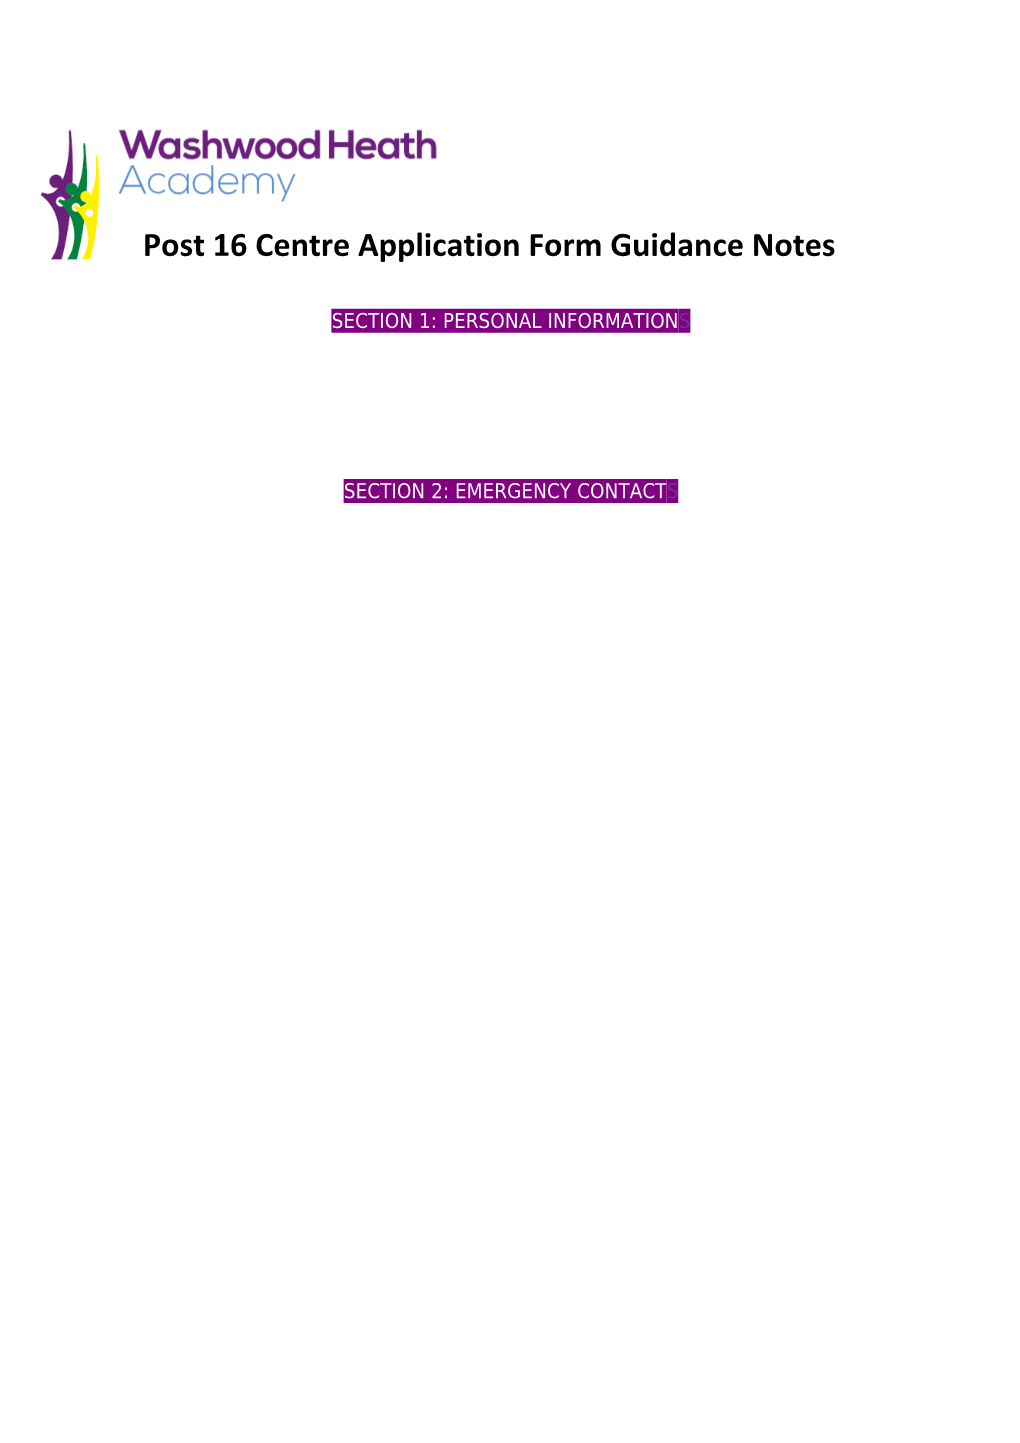 Post 16 Centre Application Form Guidance Notes